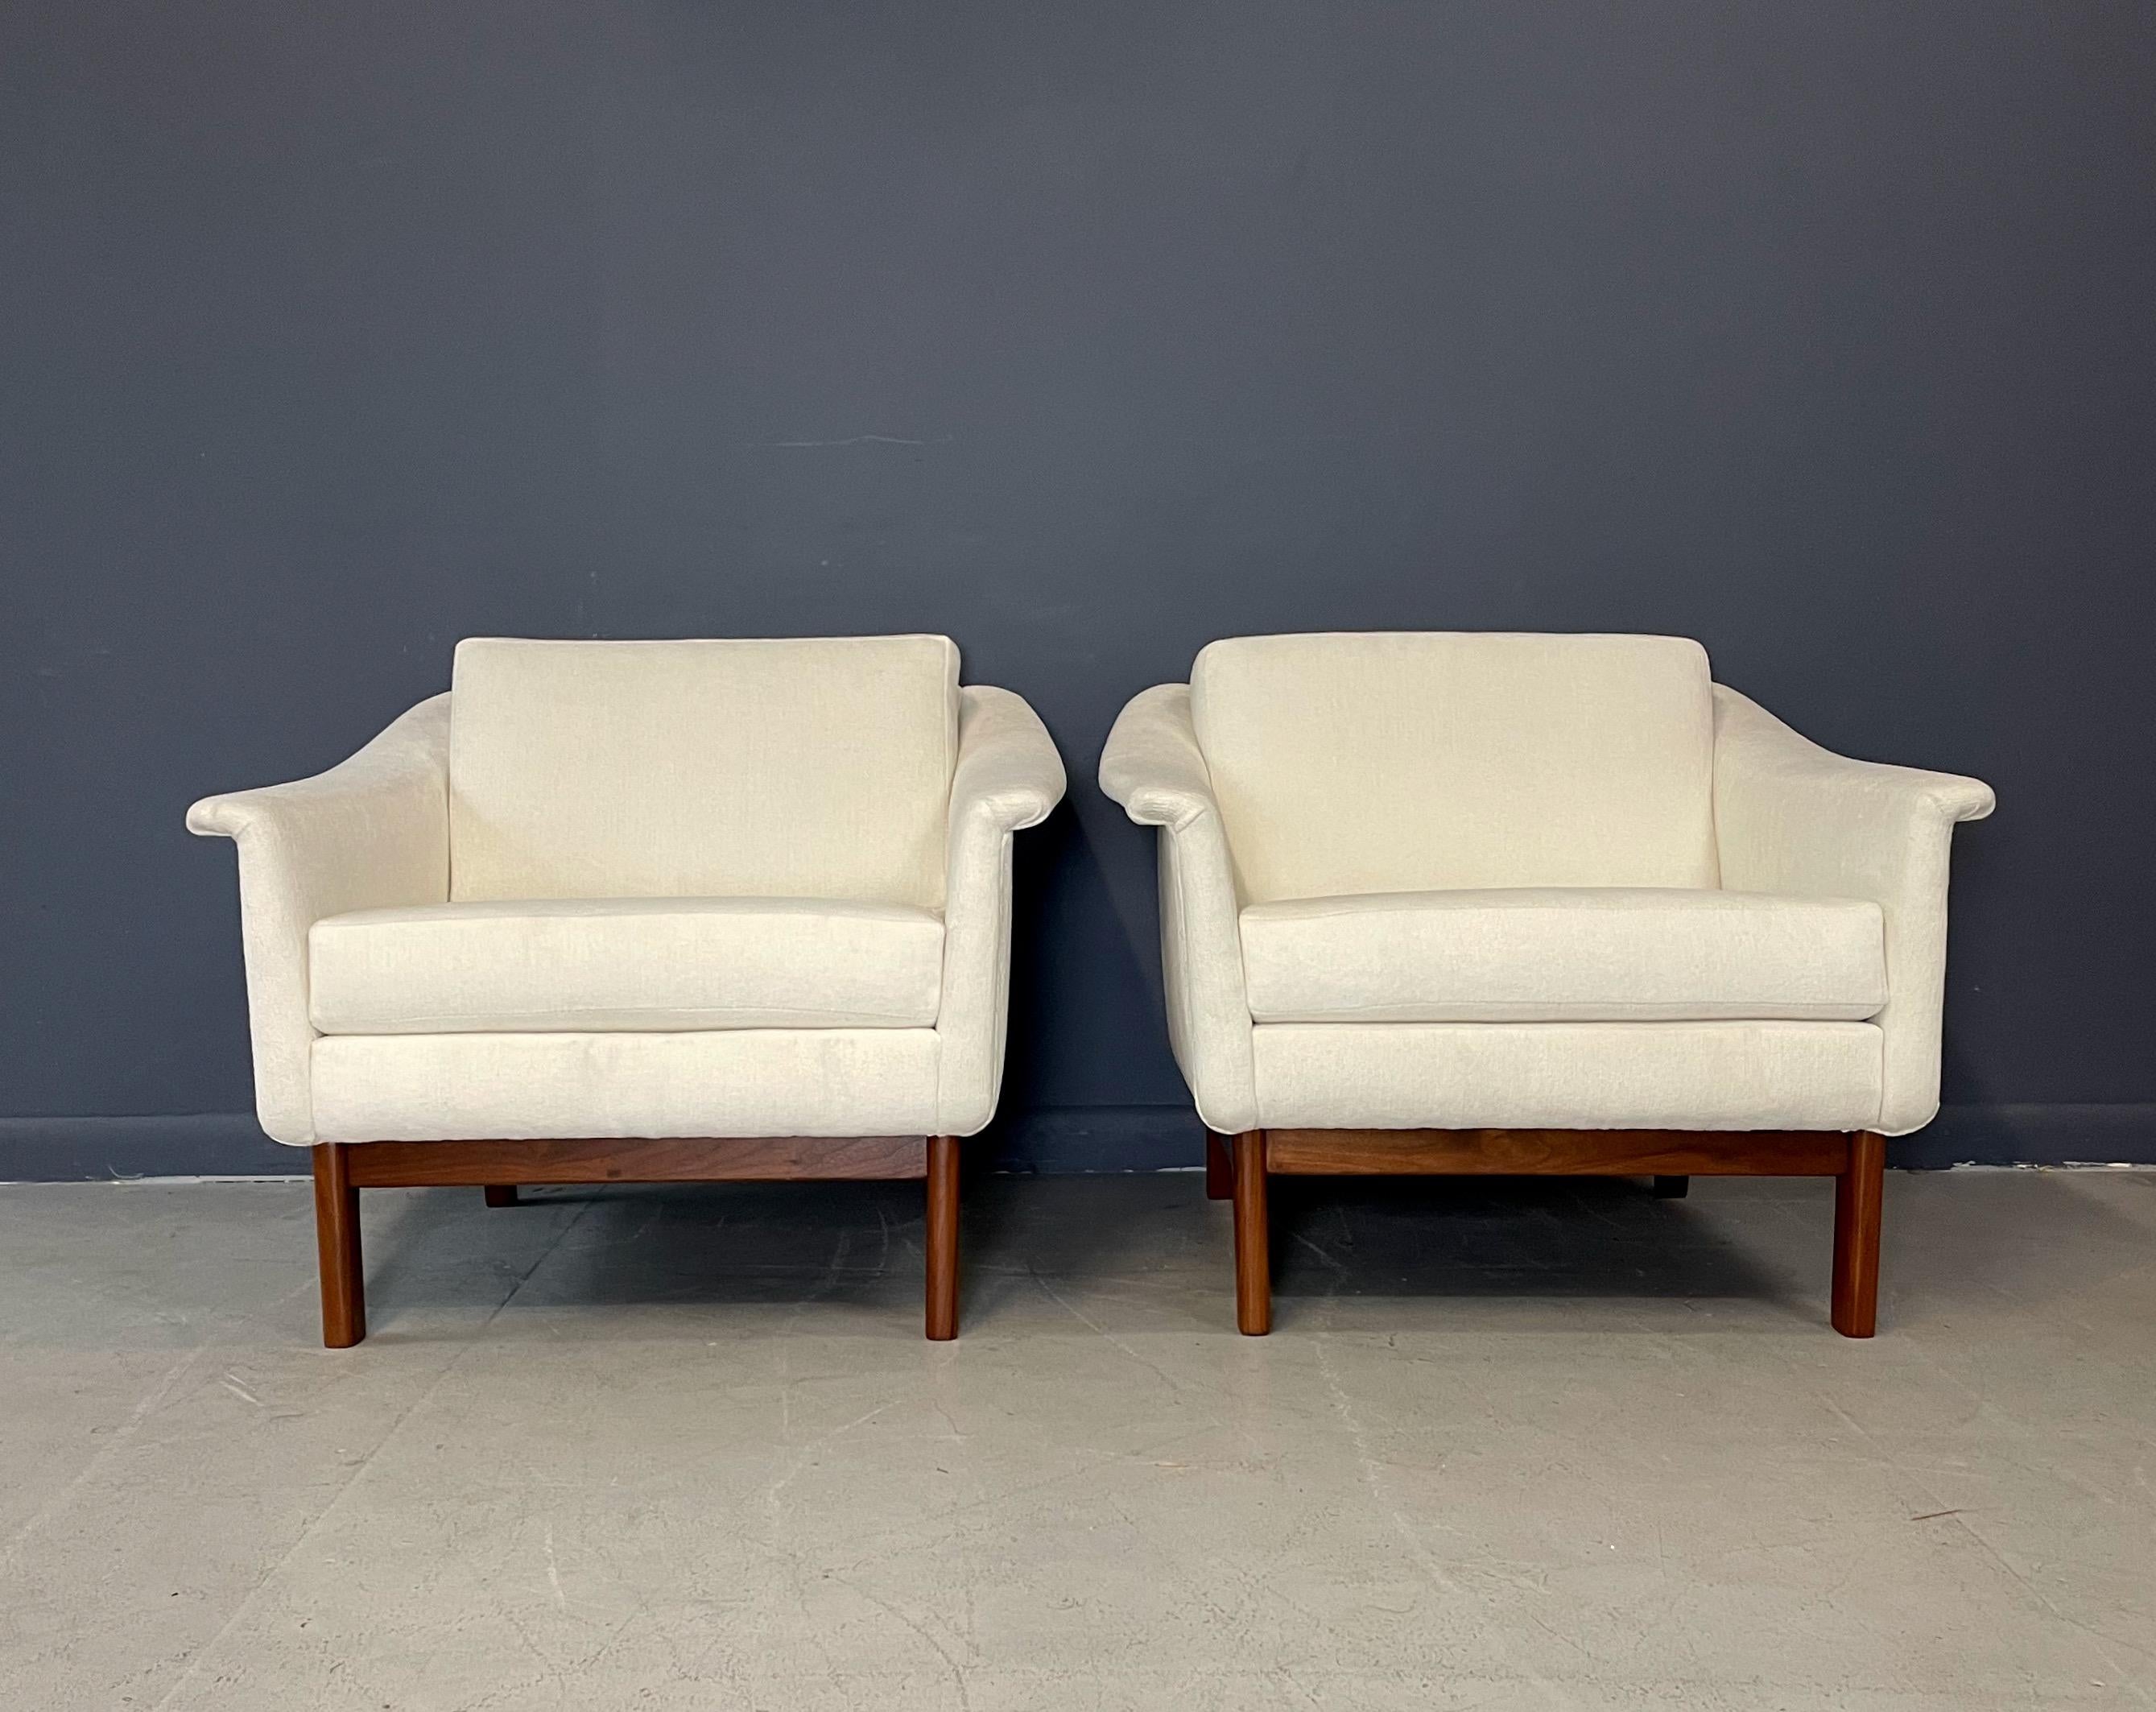 Beautiful lounge chair 'Pasadena' designed by Folke Ohlsson and produced by DUX Ljungs Industrier, Sweden. It is a very solid chair with a textured white velvet upholstery and teak frame all redone to perfection.